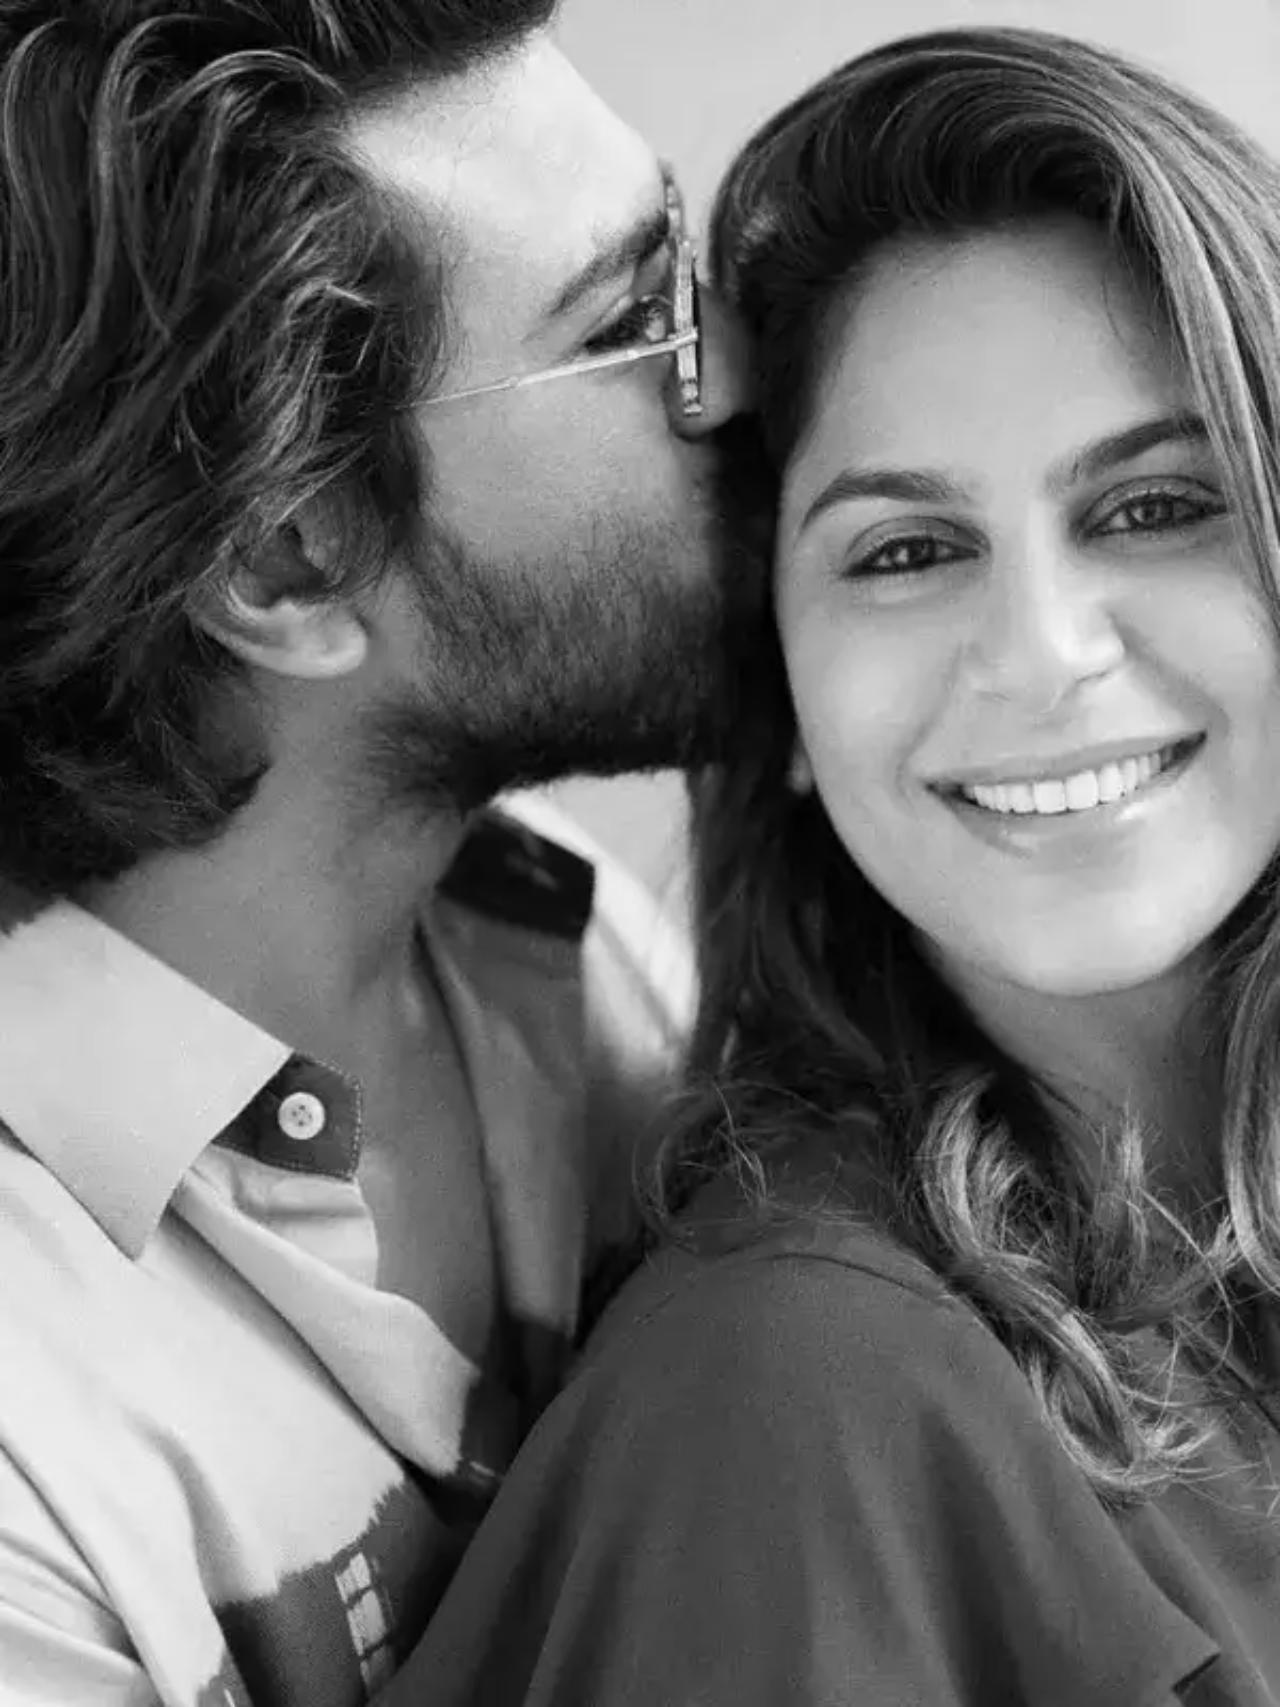 They stayed in touch on platonic even after they pursued different paths after graduating. Their love story started brewing in 2008 after the release of Ram Charan's 'Magadheera' - and the couple started seeing each other privately